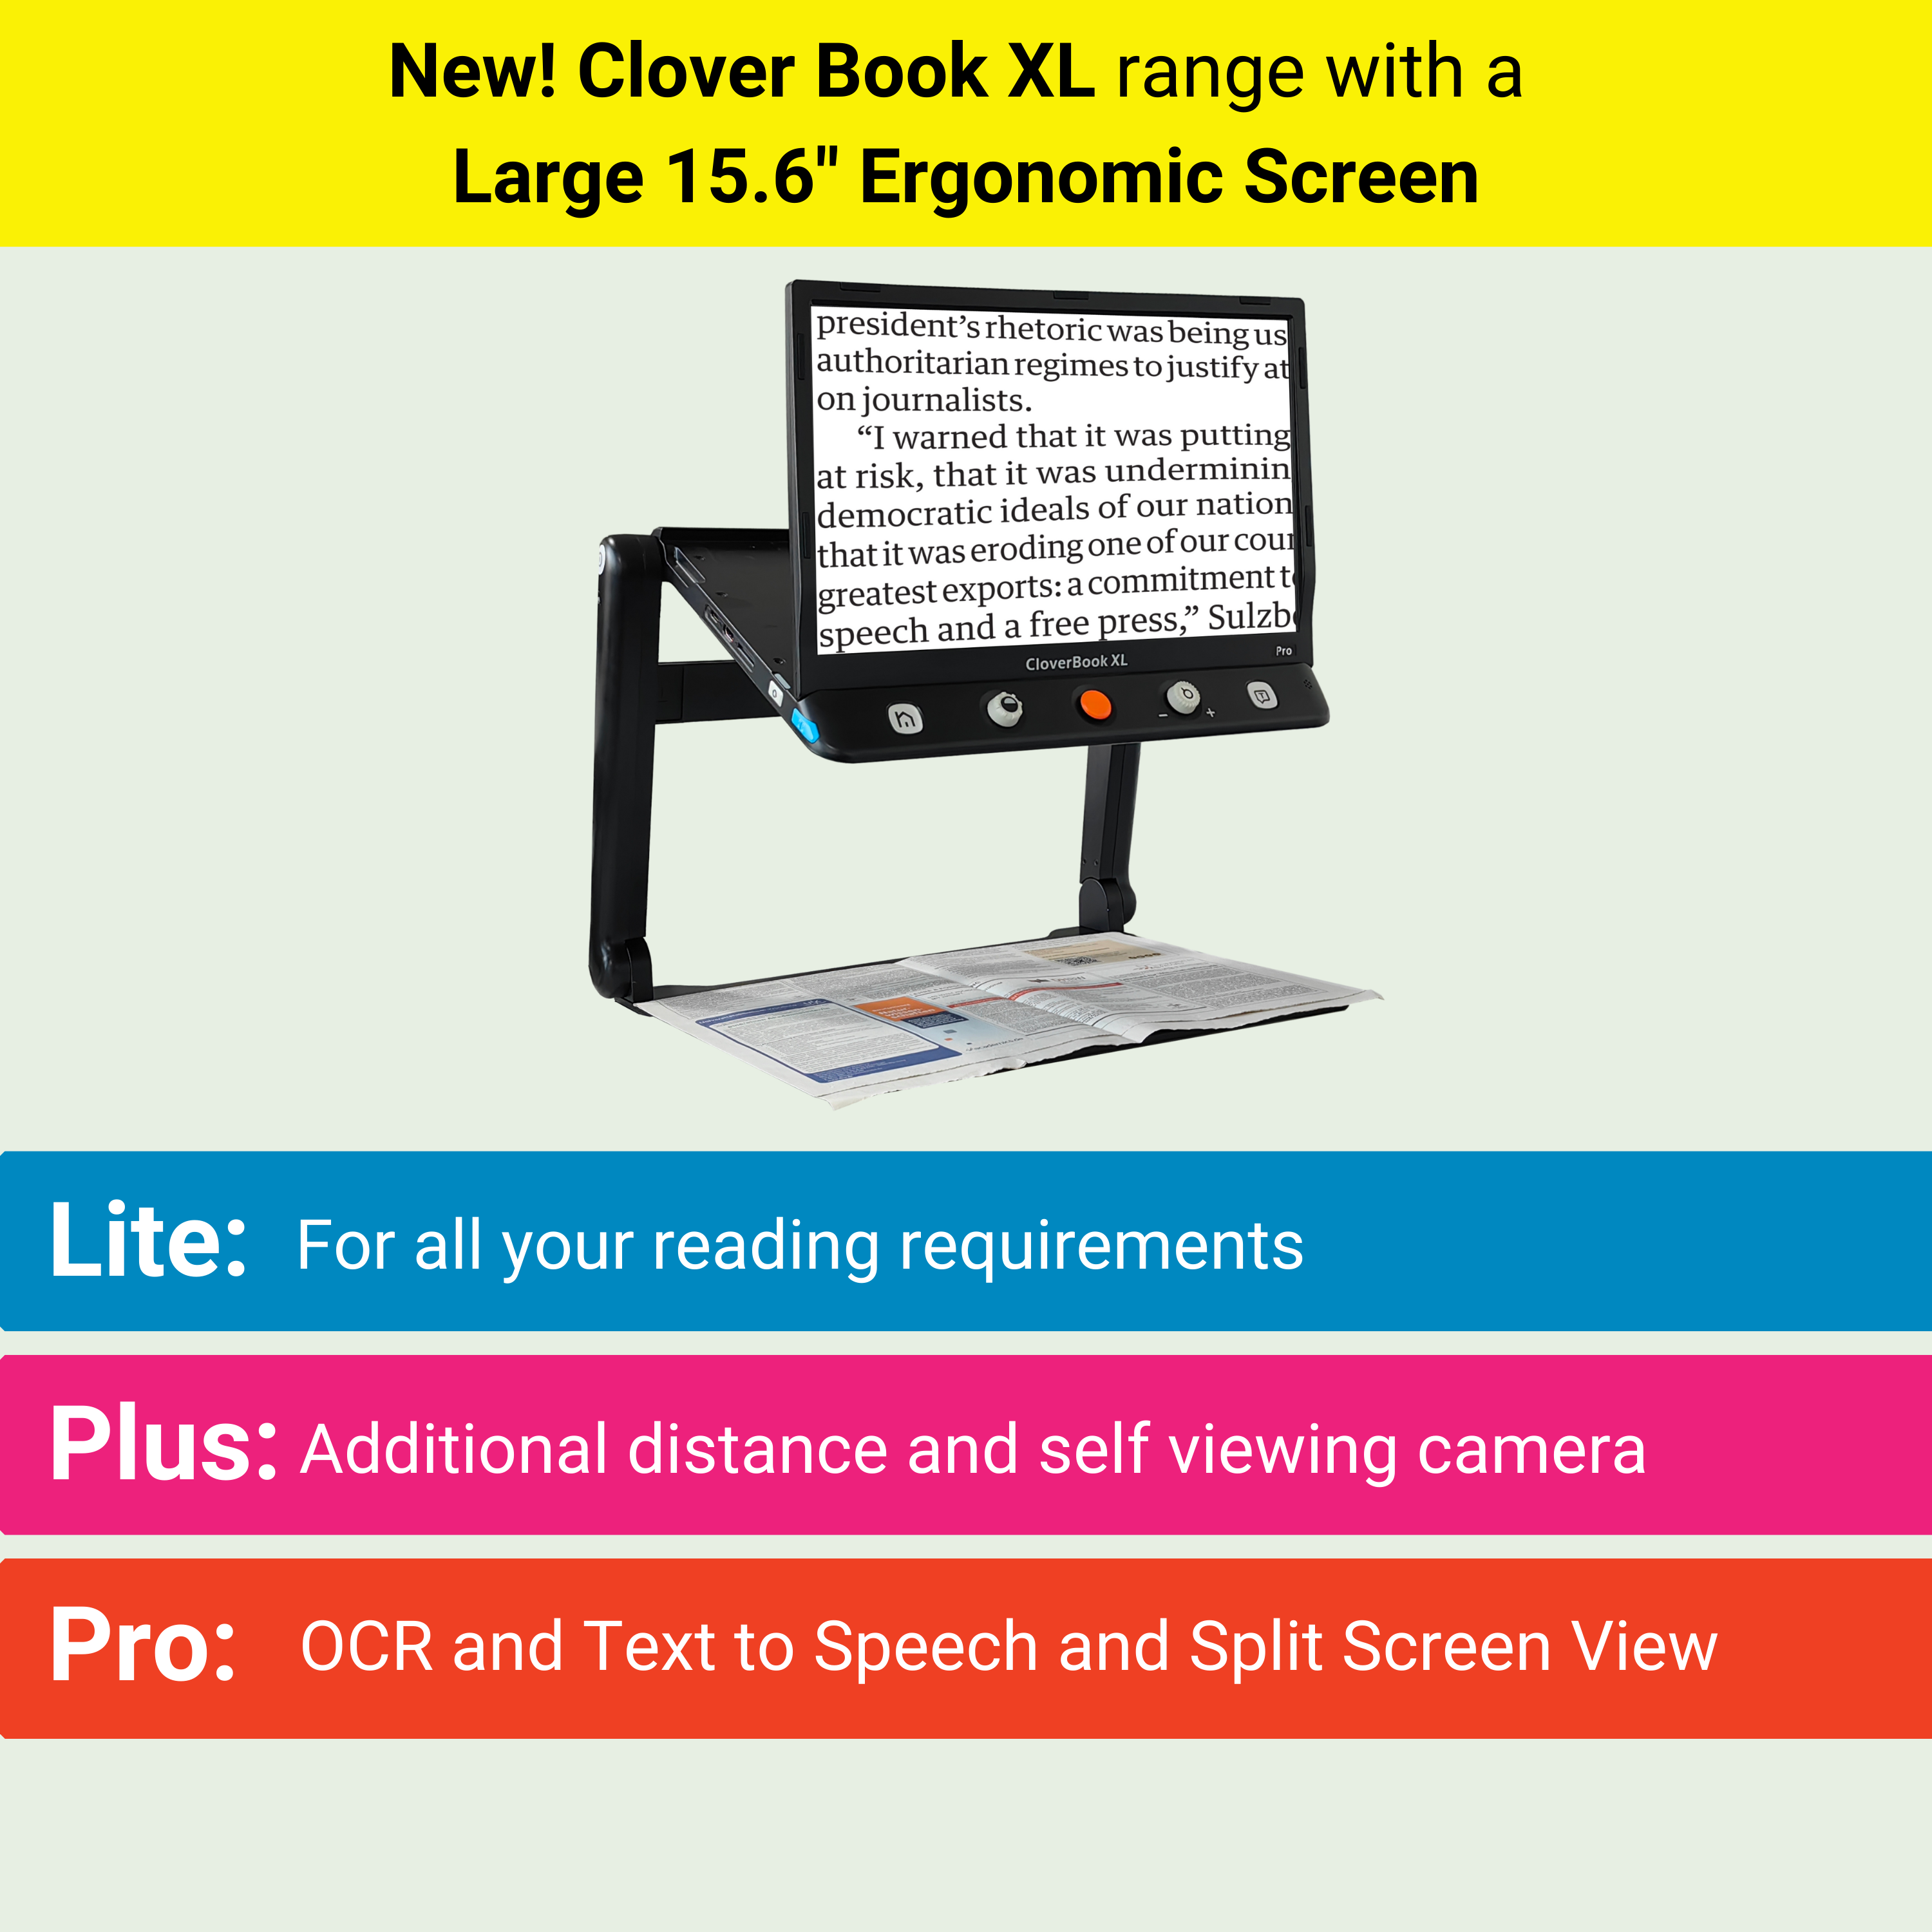 New! Clover Book XL range with a  Large 15.6" Ergonomic Screen. Lite: For all your reading requirements. Plus: Additional distance and self viewing camera. Pro: OCR and Text to Speech and Split Screen View